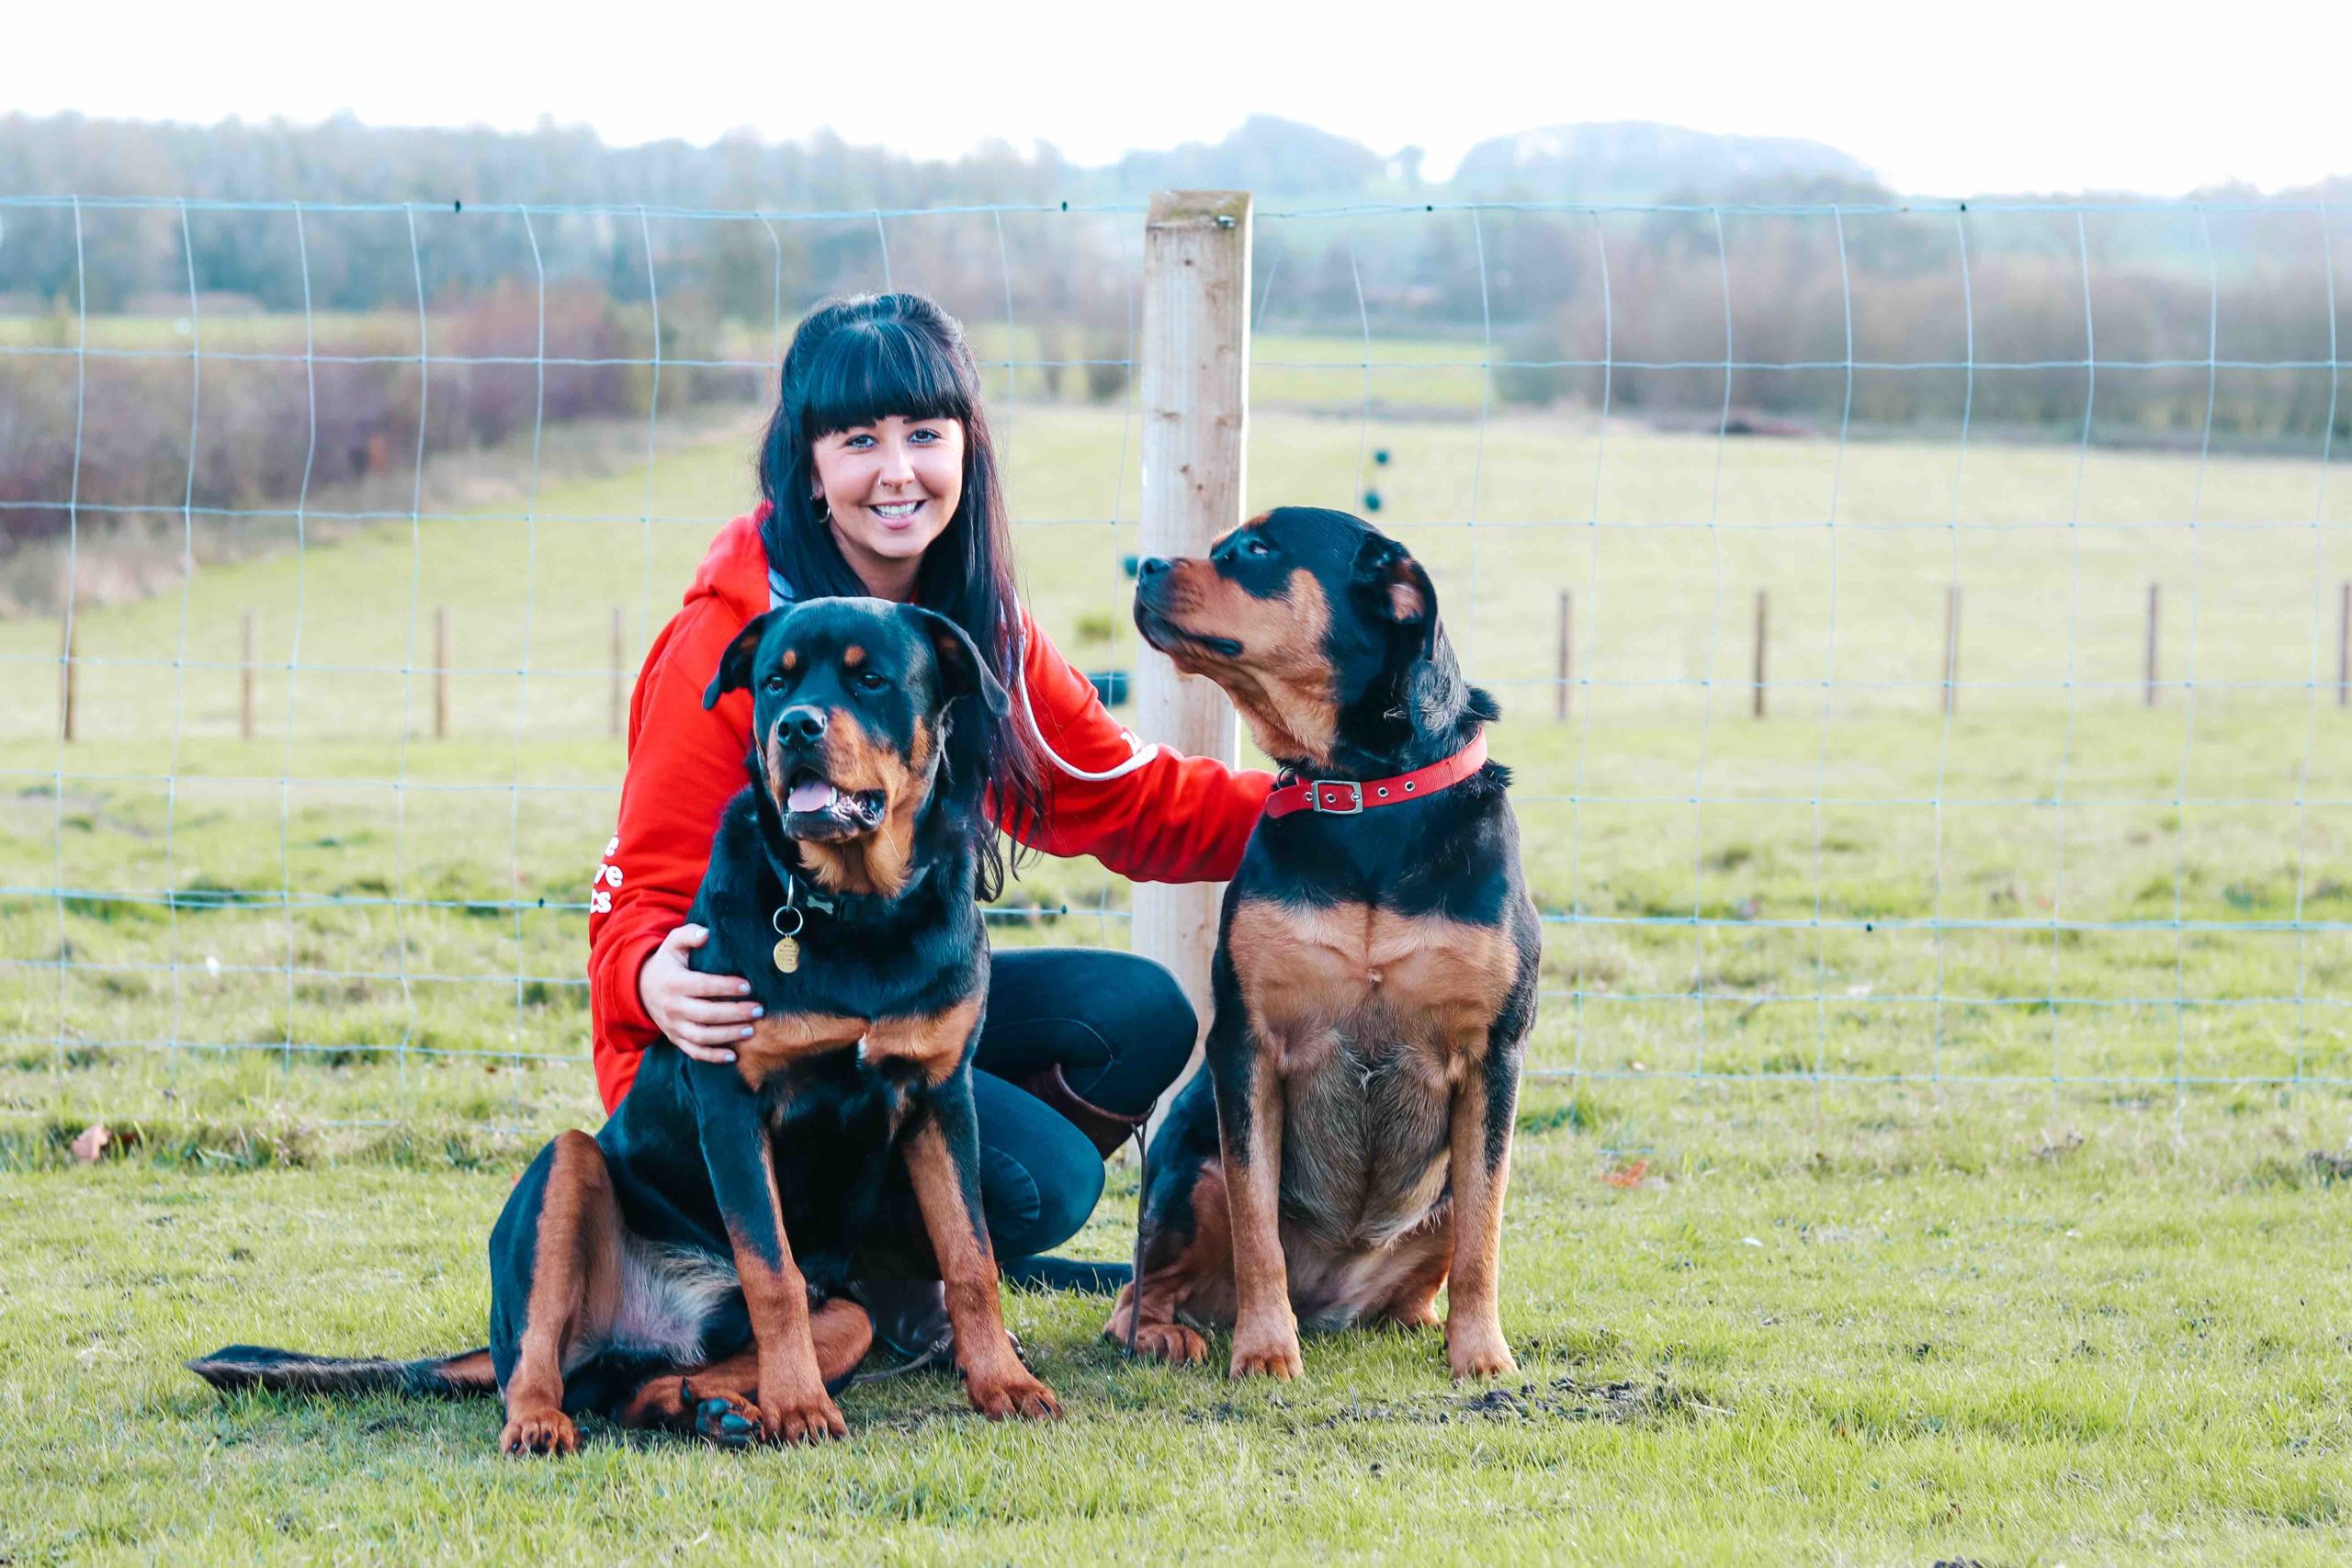 Danielle from We Love Pets kneeling with two sitting dogs